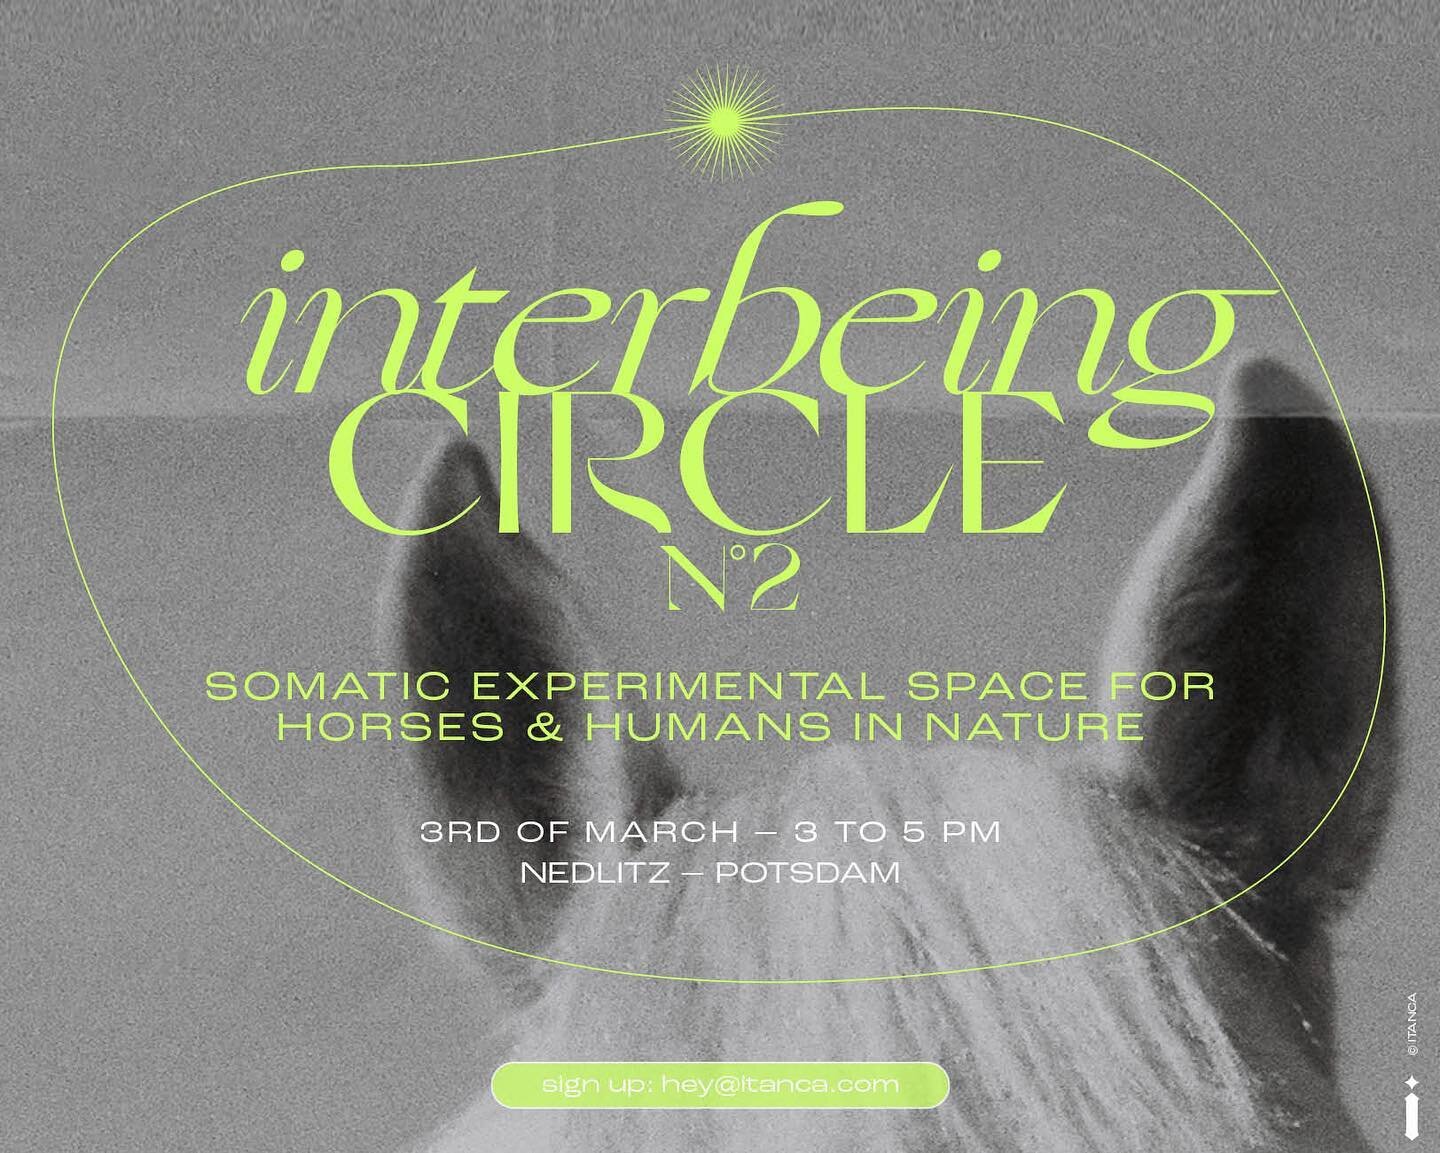 Interbeing Circle N✹2

A somatic conversation with nature

Hey there
In summer I created this workshop container with my dear friend Barbara Collier from Arizona. I&rsquo;m super excited to announce: The next interbeing circle will be happening in ma